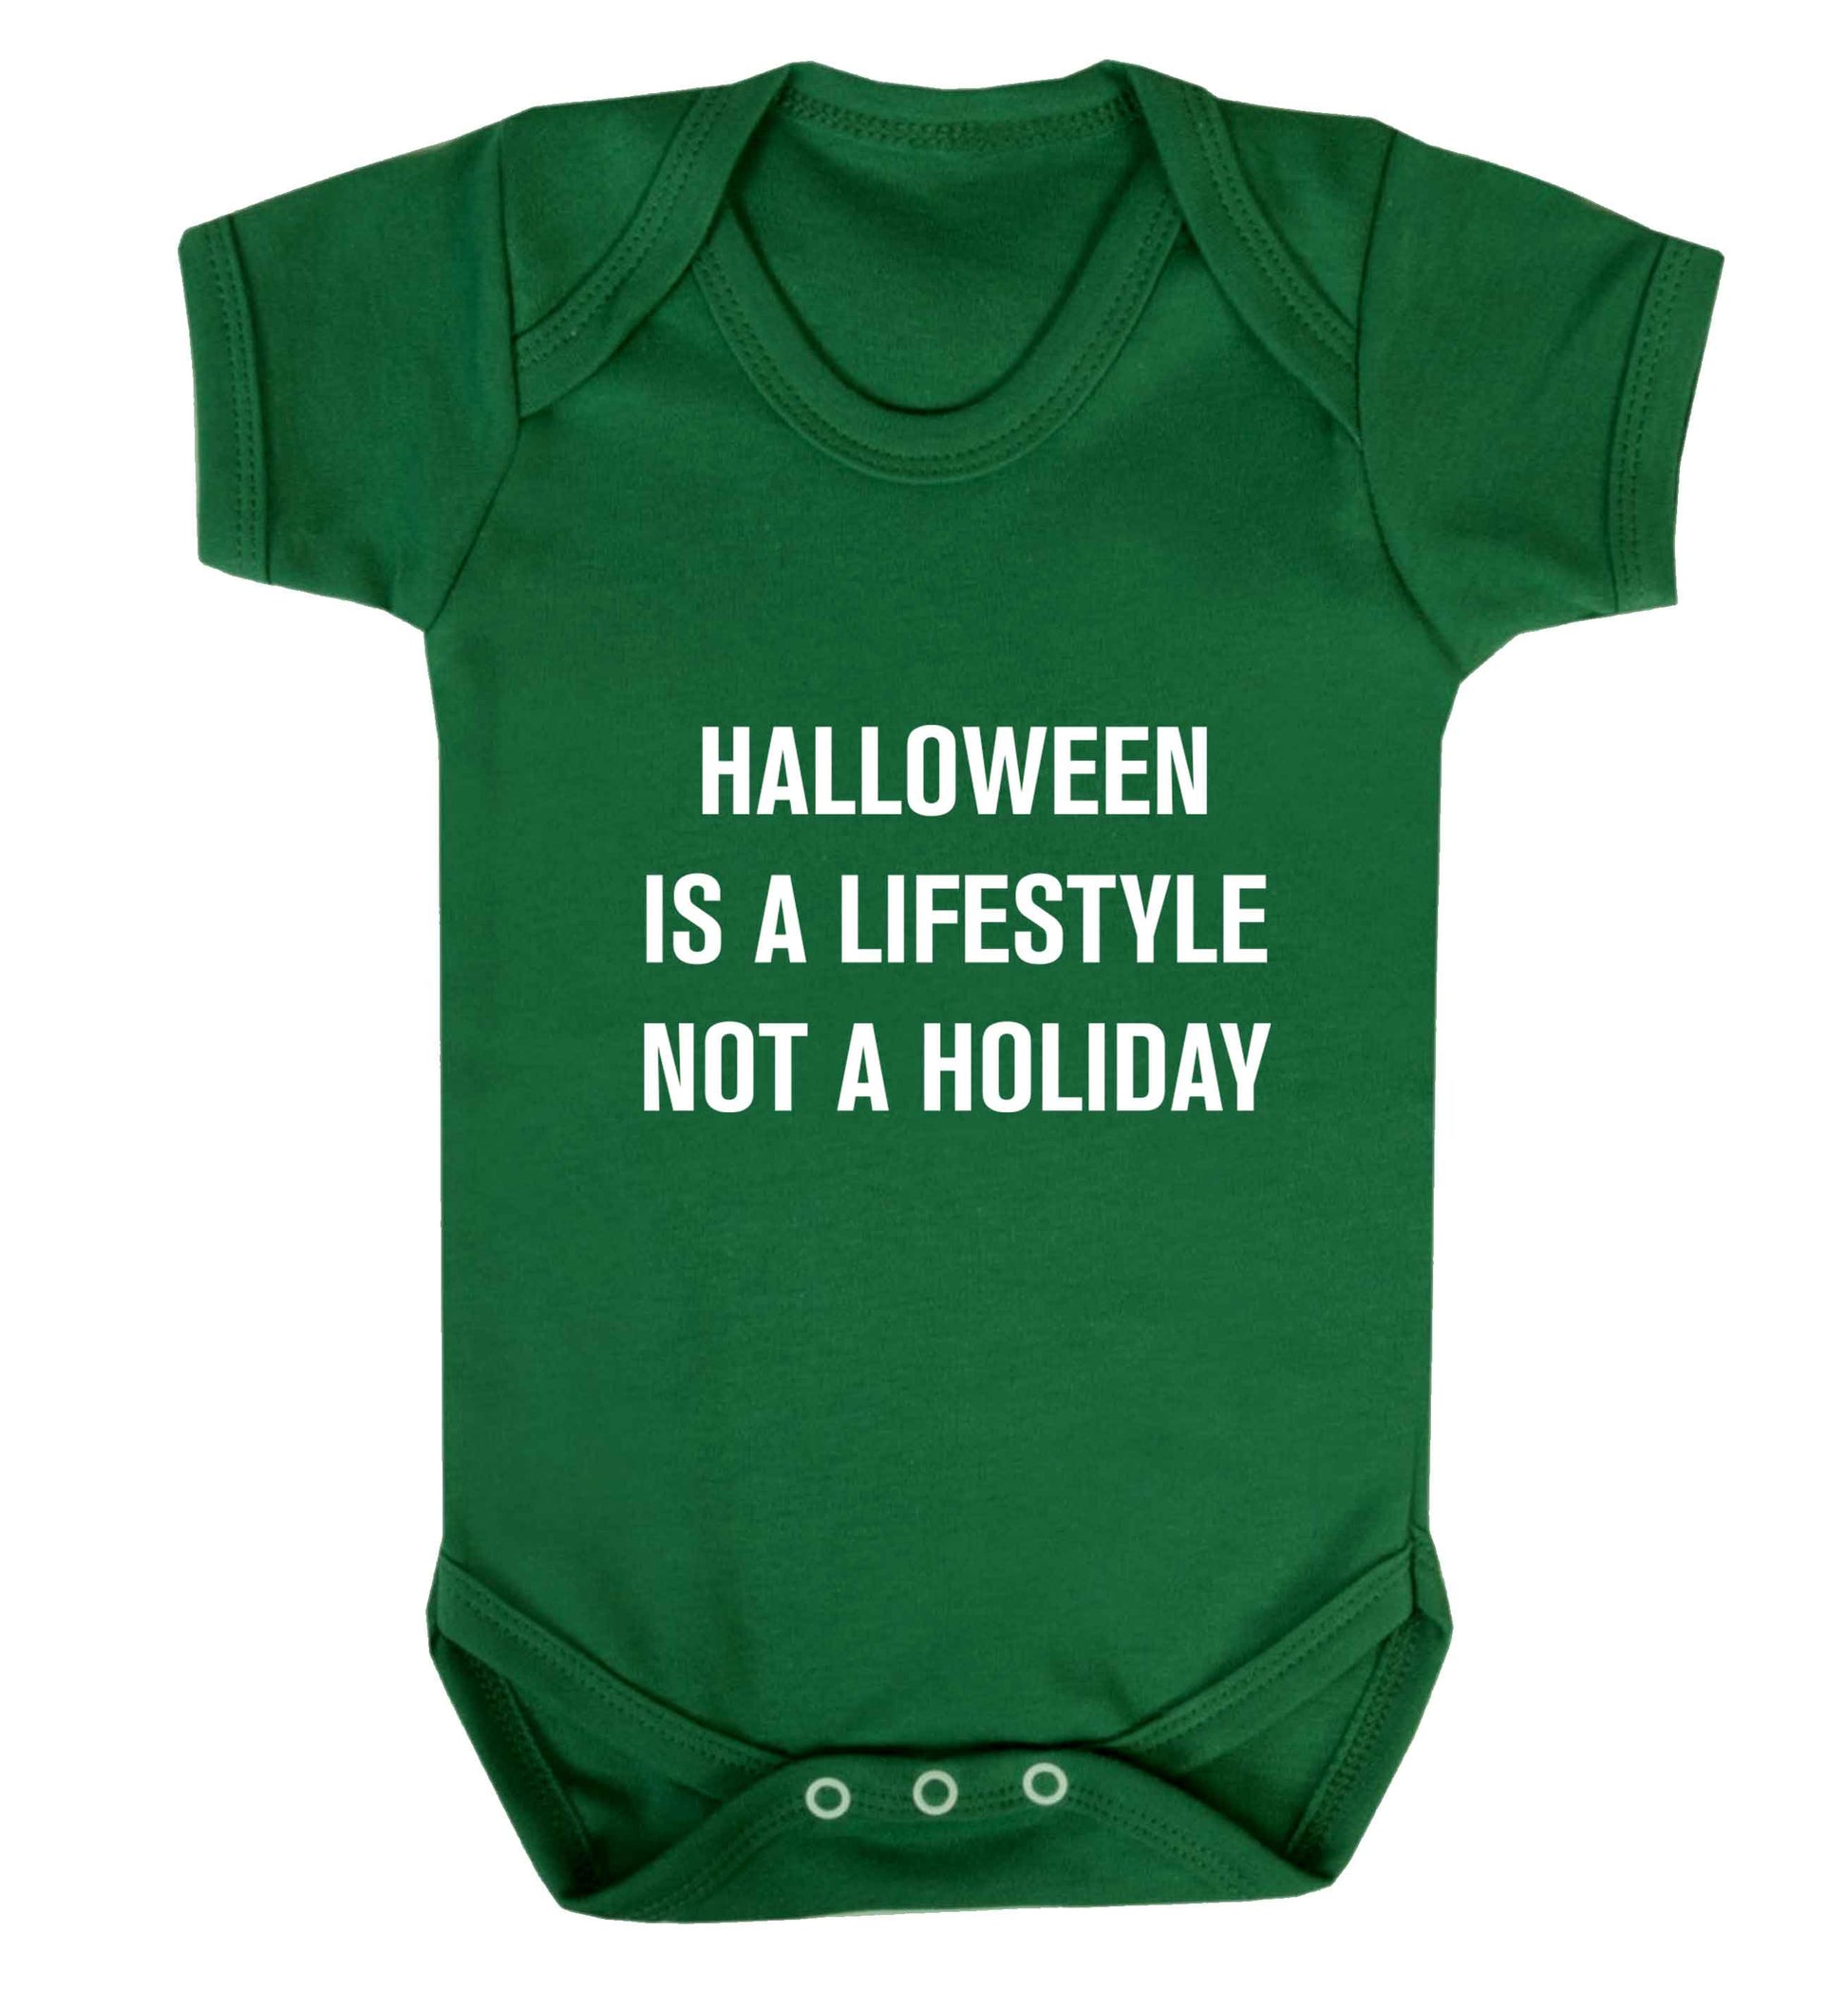 Halloween is a lifestyle not a holiday baby vest green 18-24 months